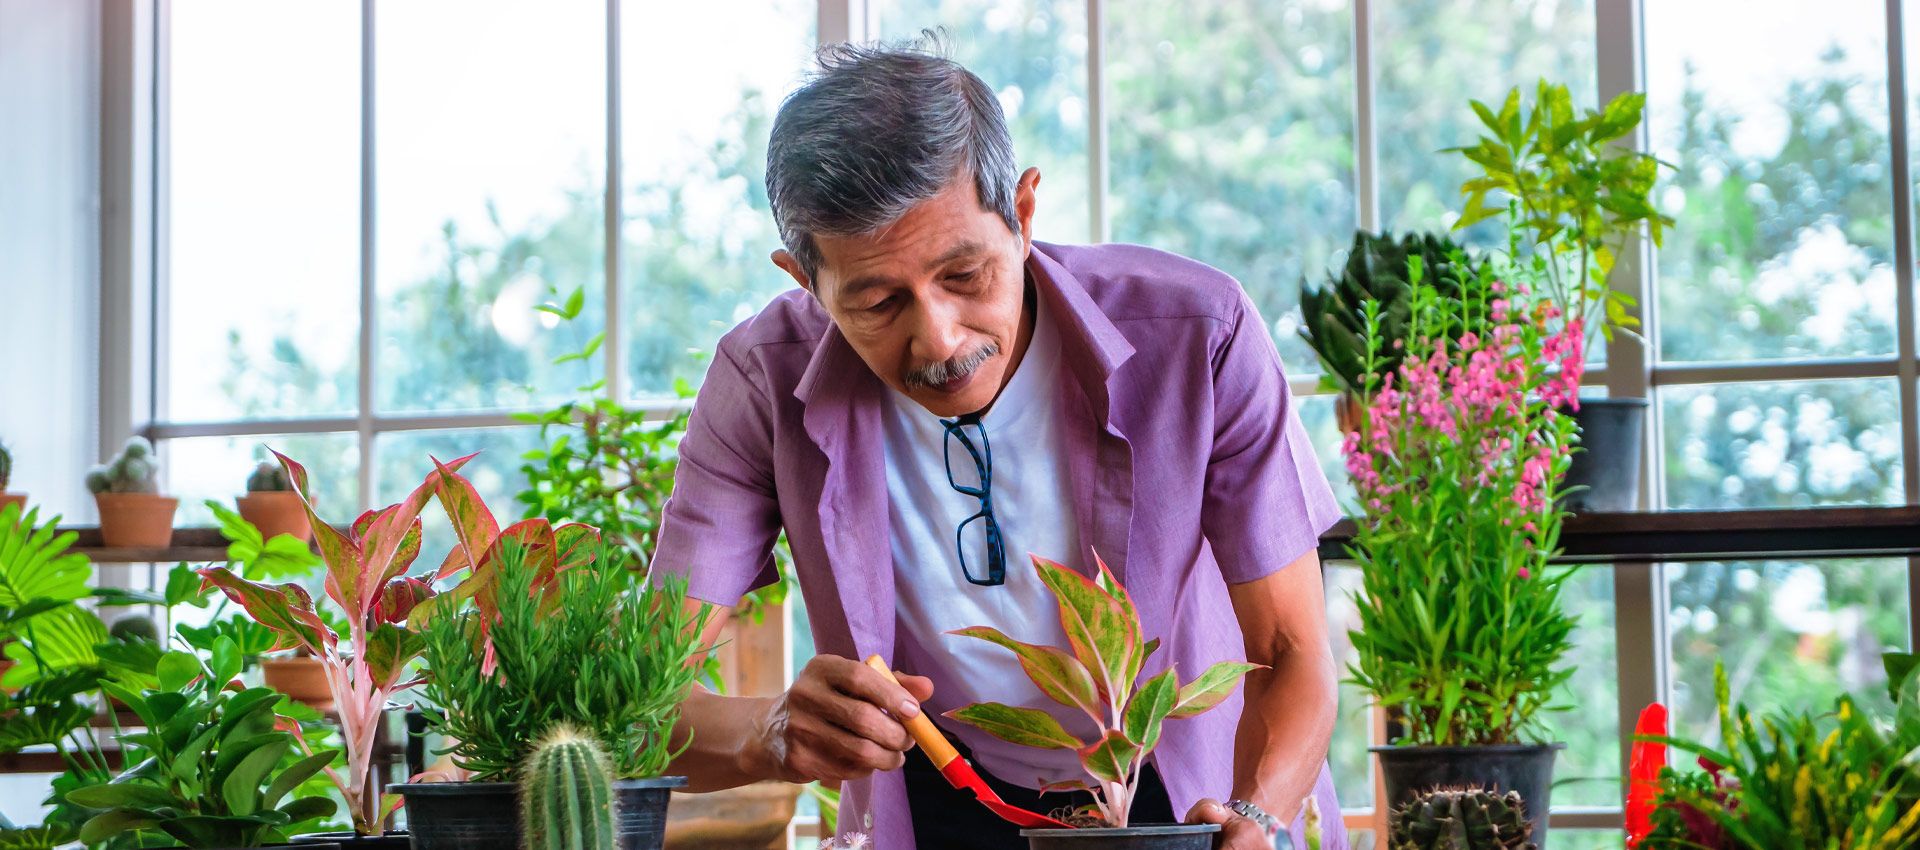 An elderly Asian man pruning a plant in a greenhouse surrounded by plants